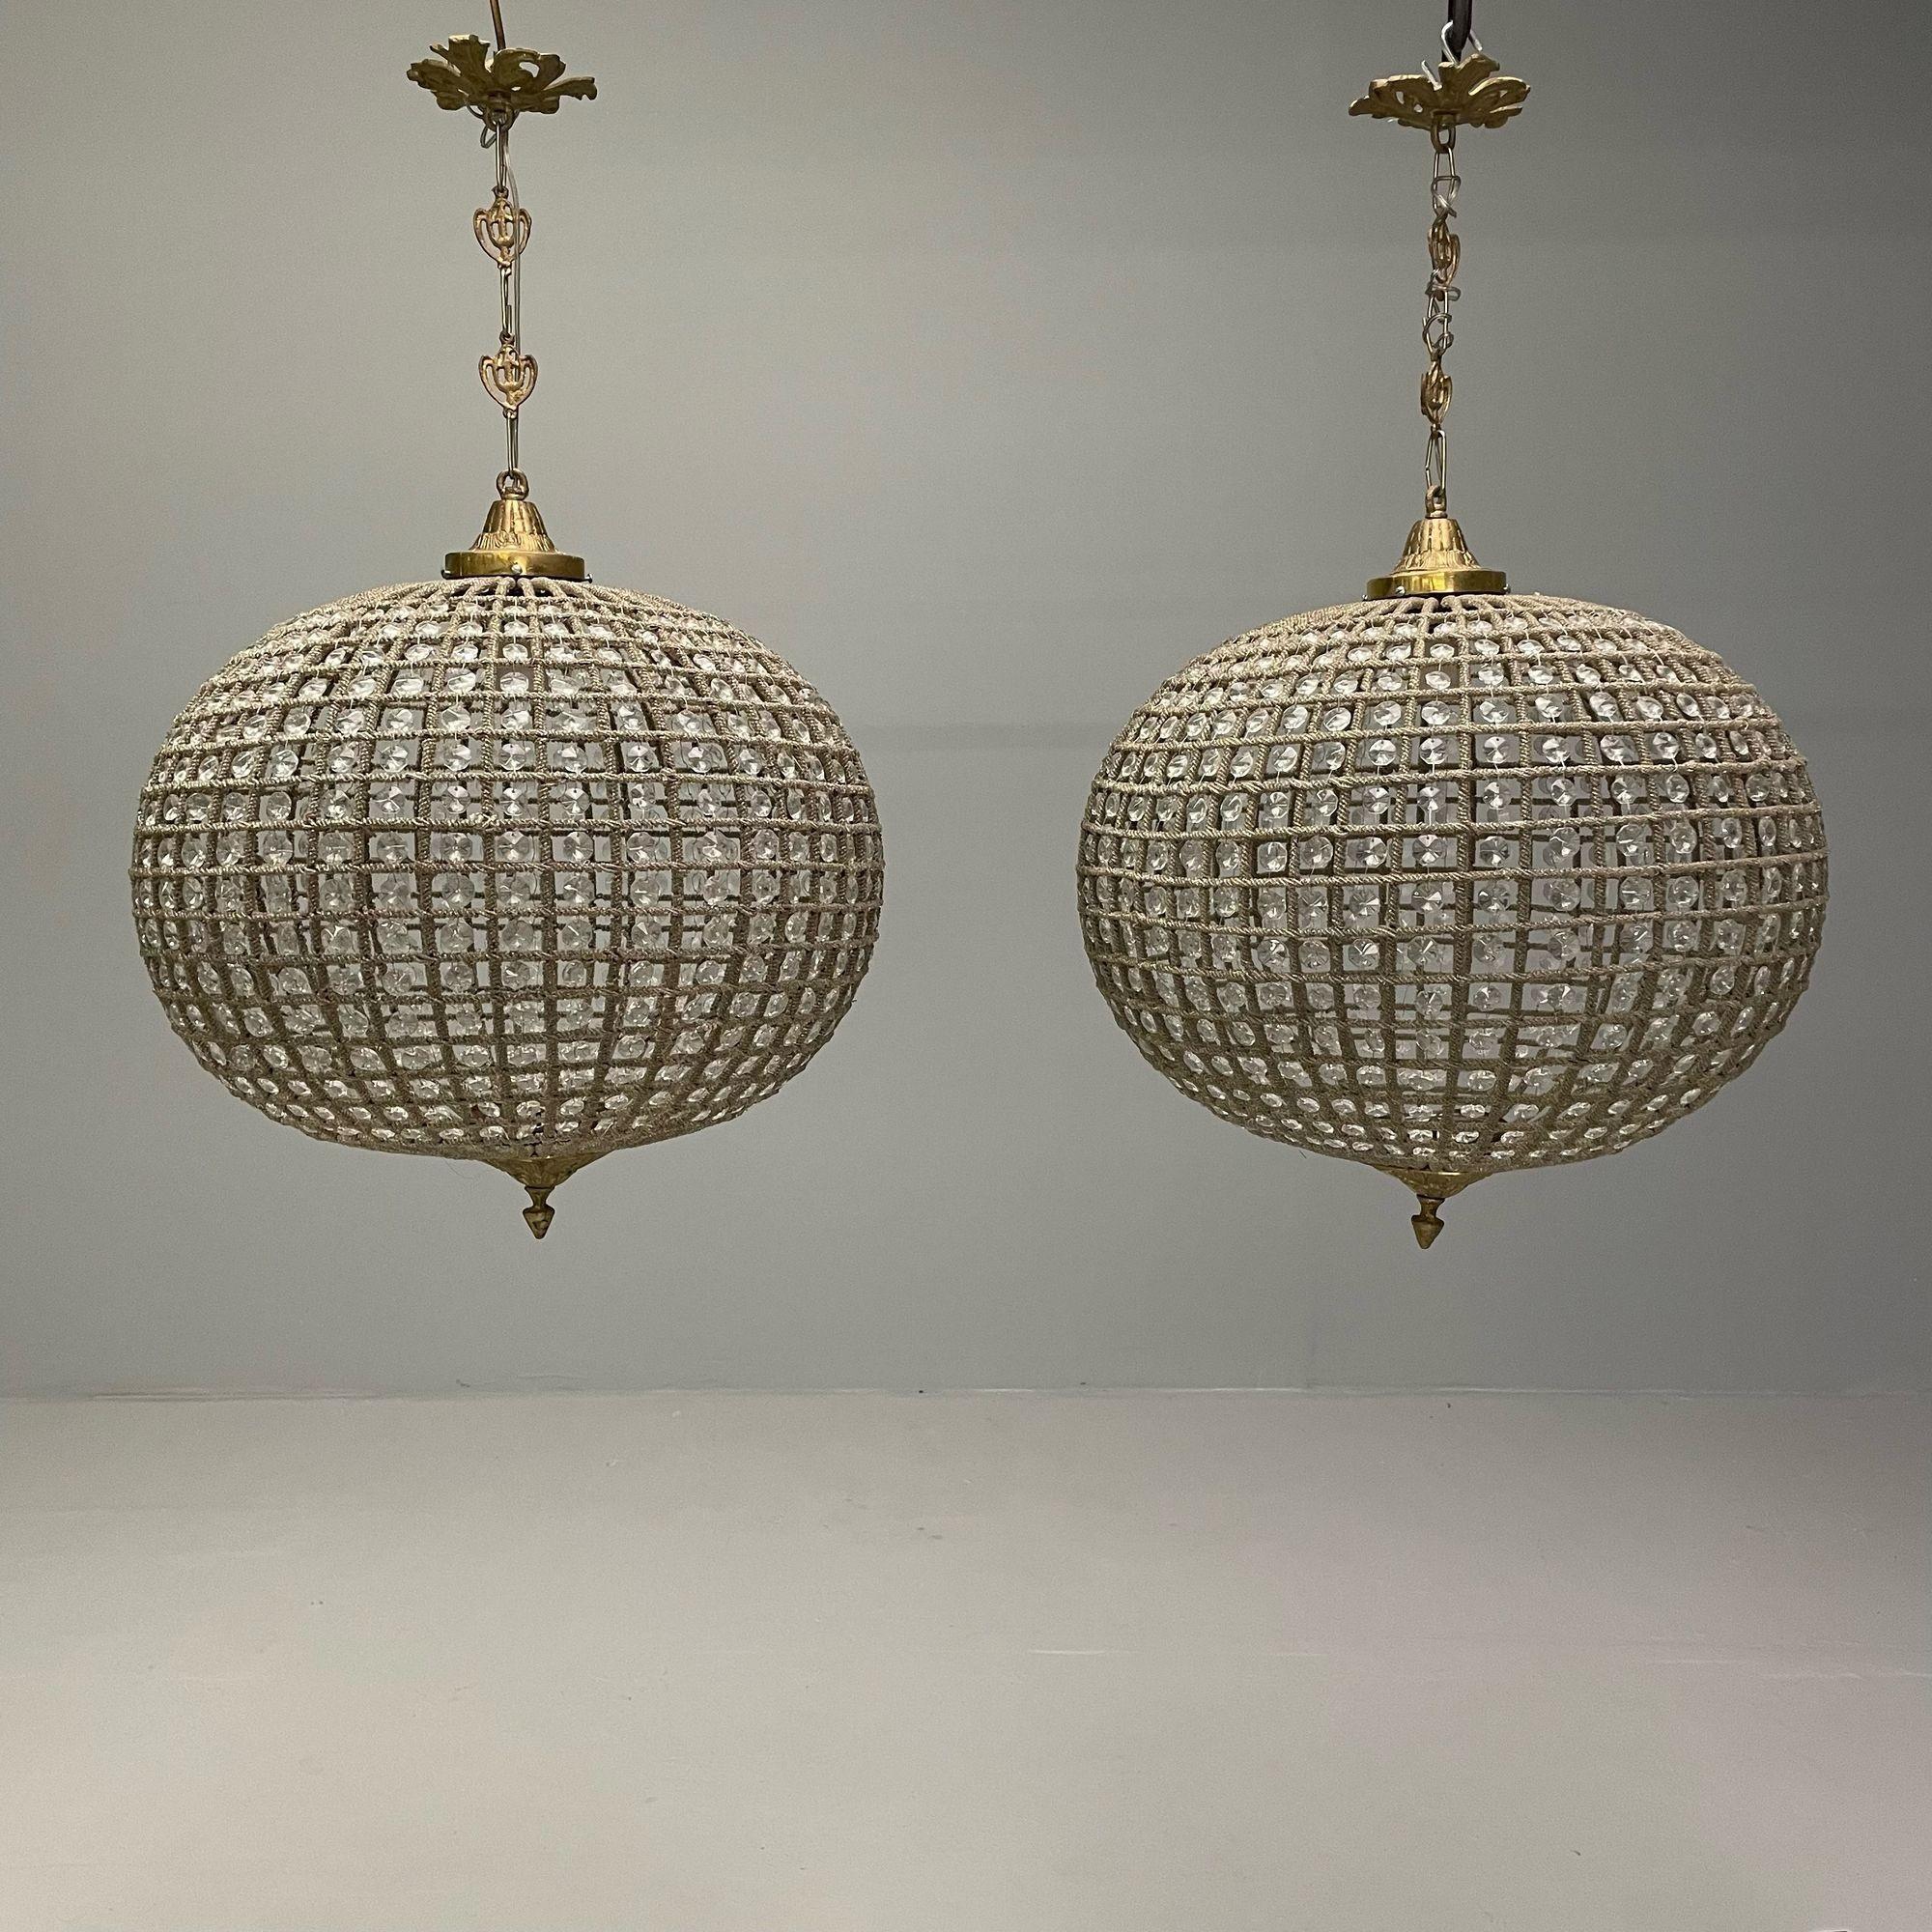 Art Deco, Round Chandeliers, Beveled Crystal, Metal, American, 1980s In Good Condition For Sale In Stamford, CT